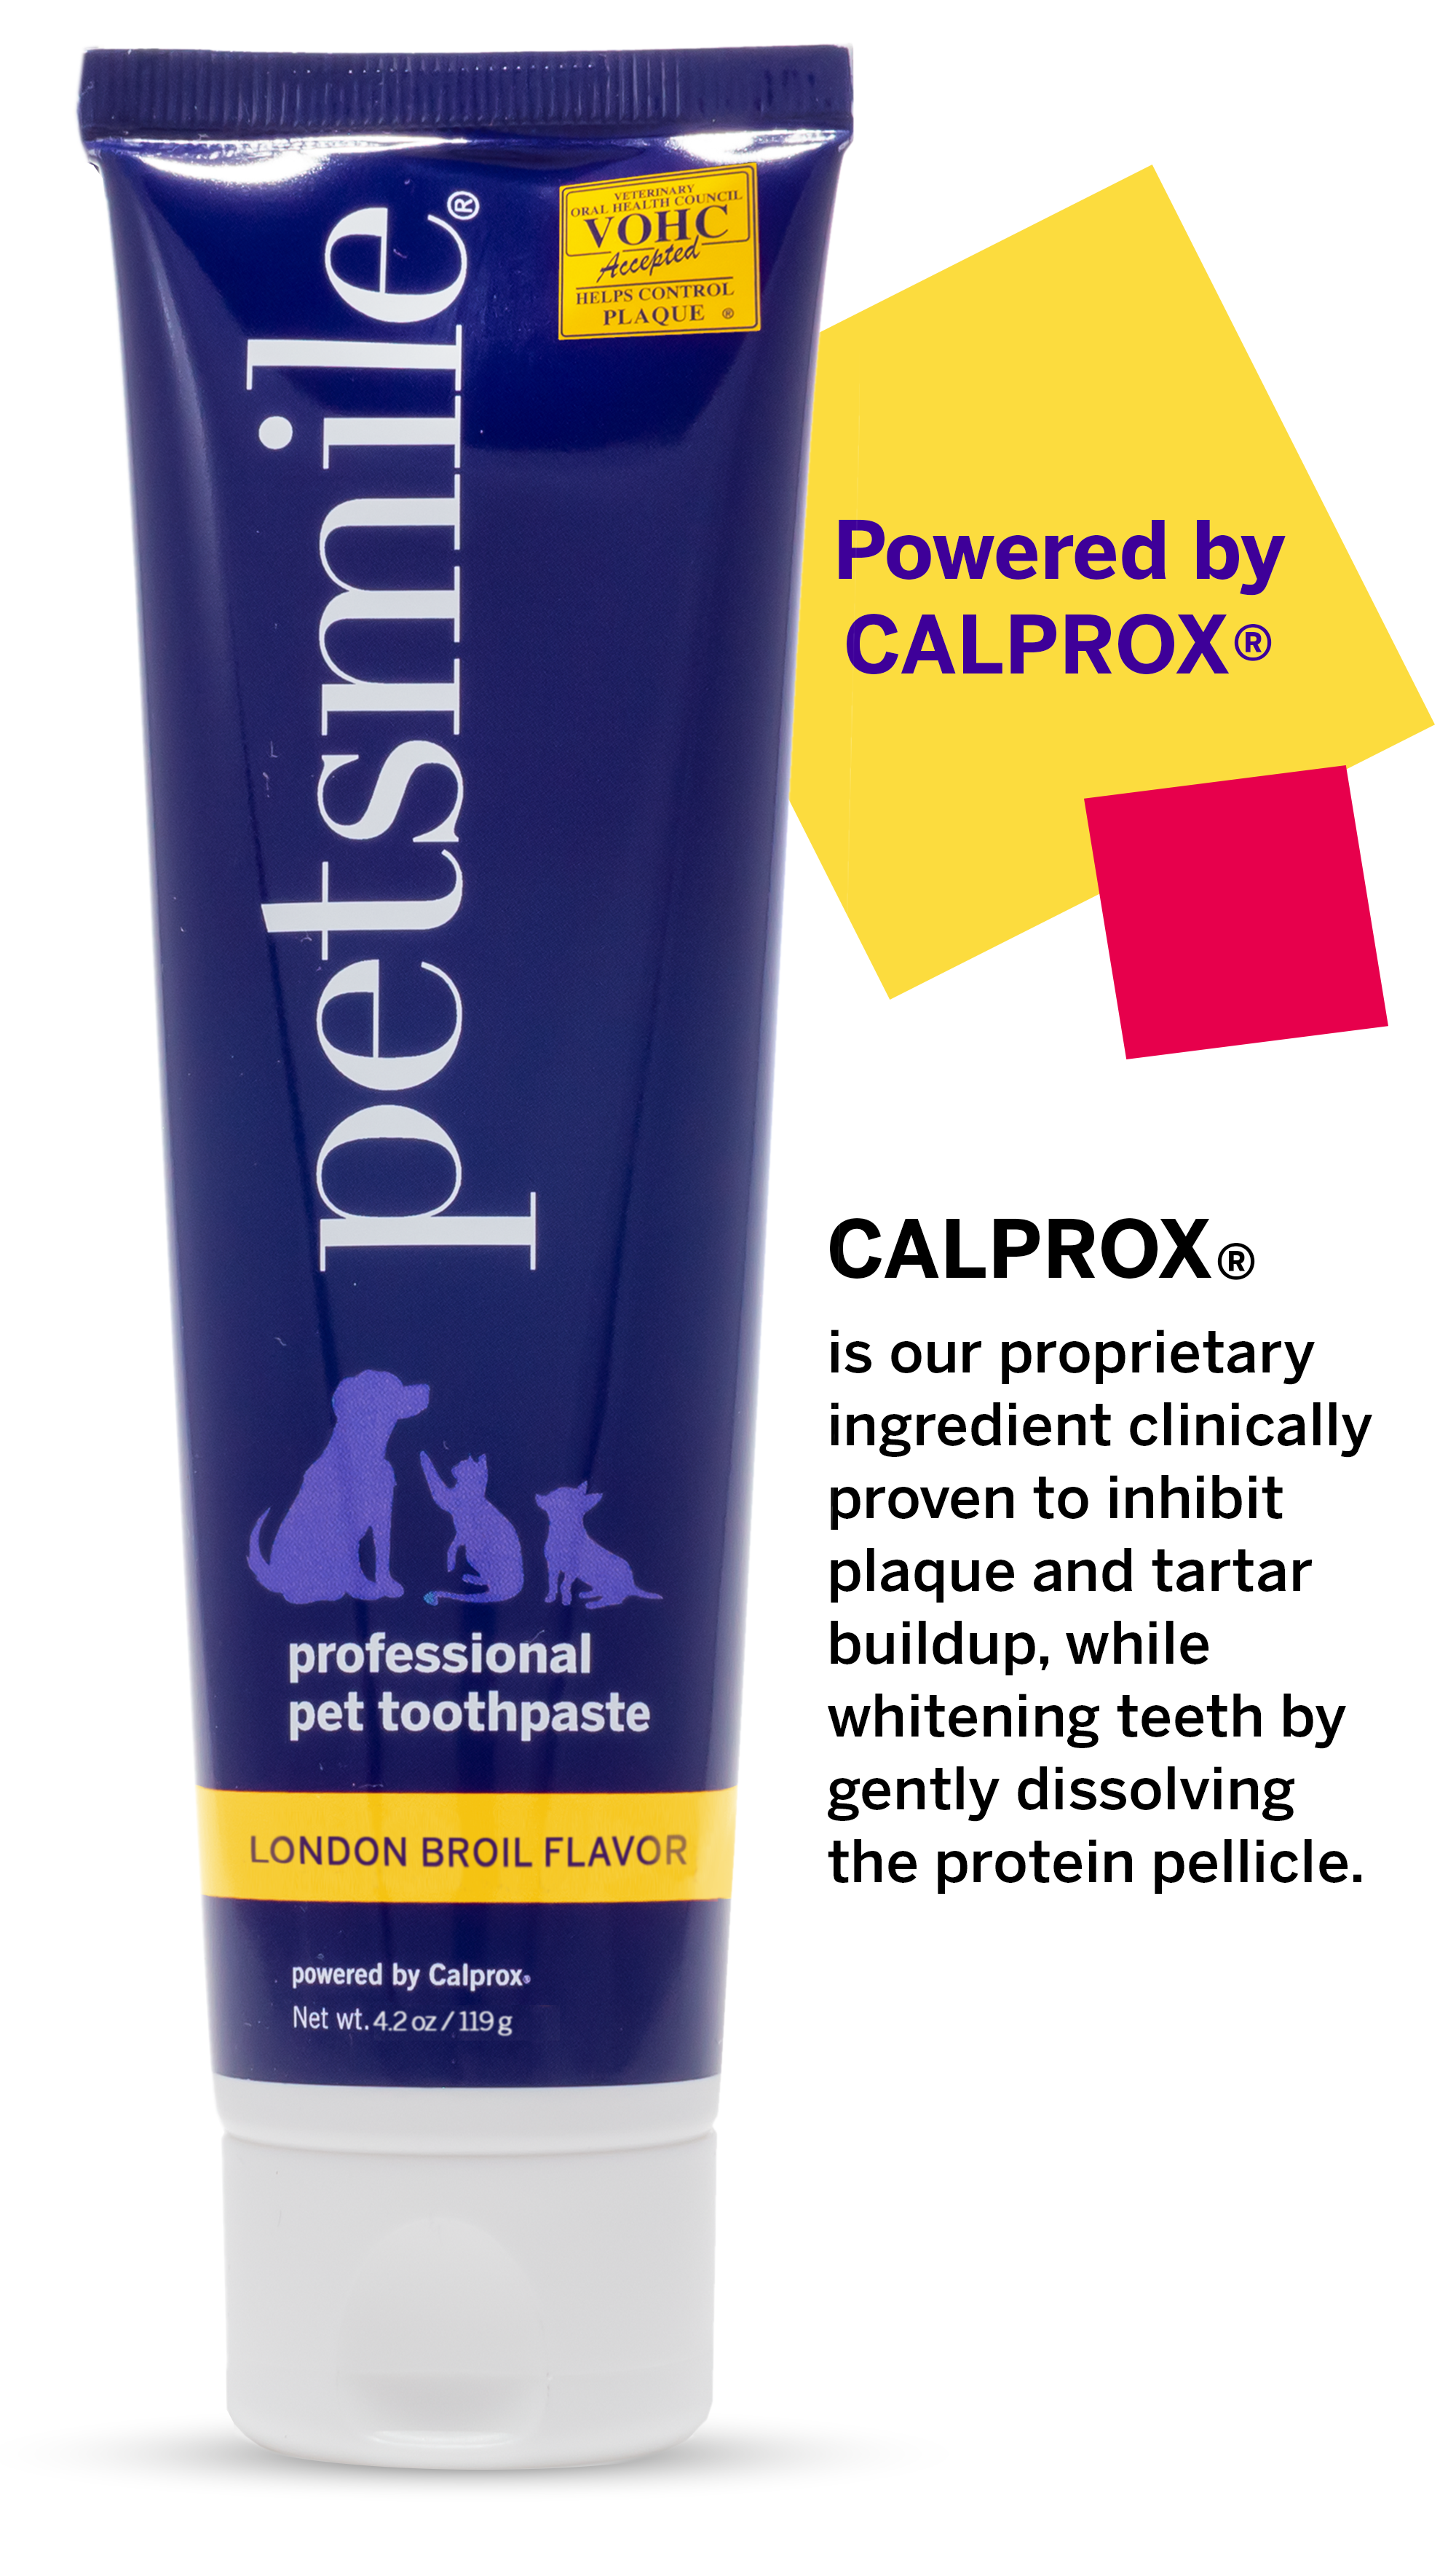 Clinically proven, London broil flavor , Large tube, BPA-free, vegan , Calprox-powered, better oral hygiene , Large toothpaste with Calprox , 4.2 OZ London Broil Flavor cat toothpaste , VOHC sealed petsmile professional cat toothpaste